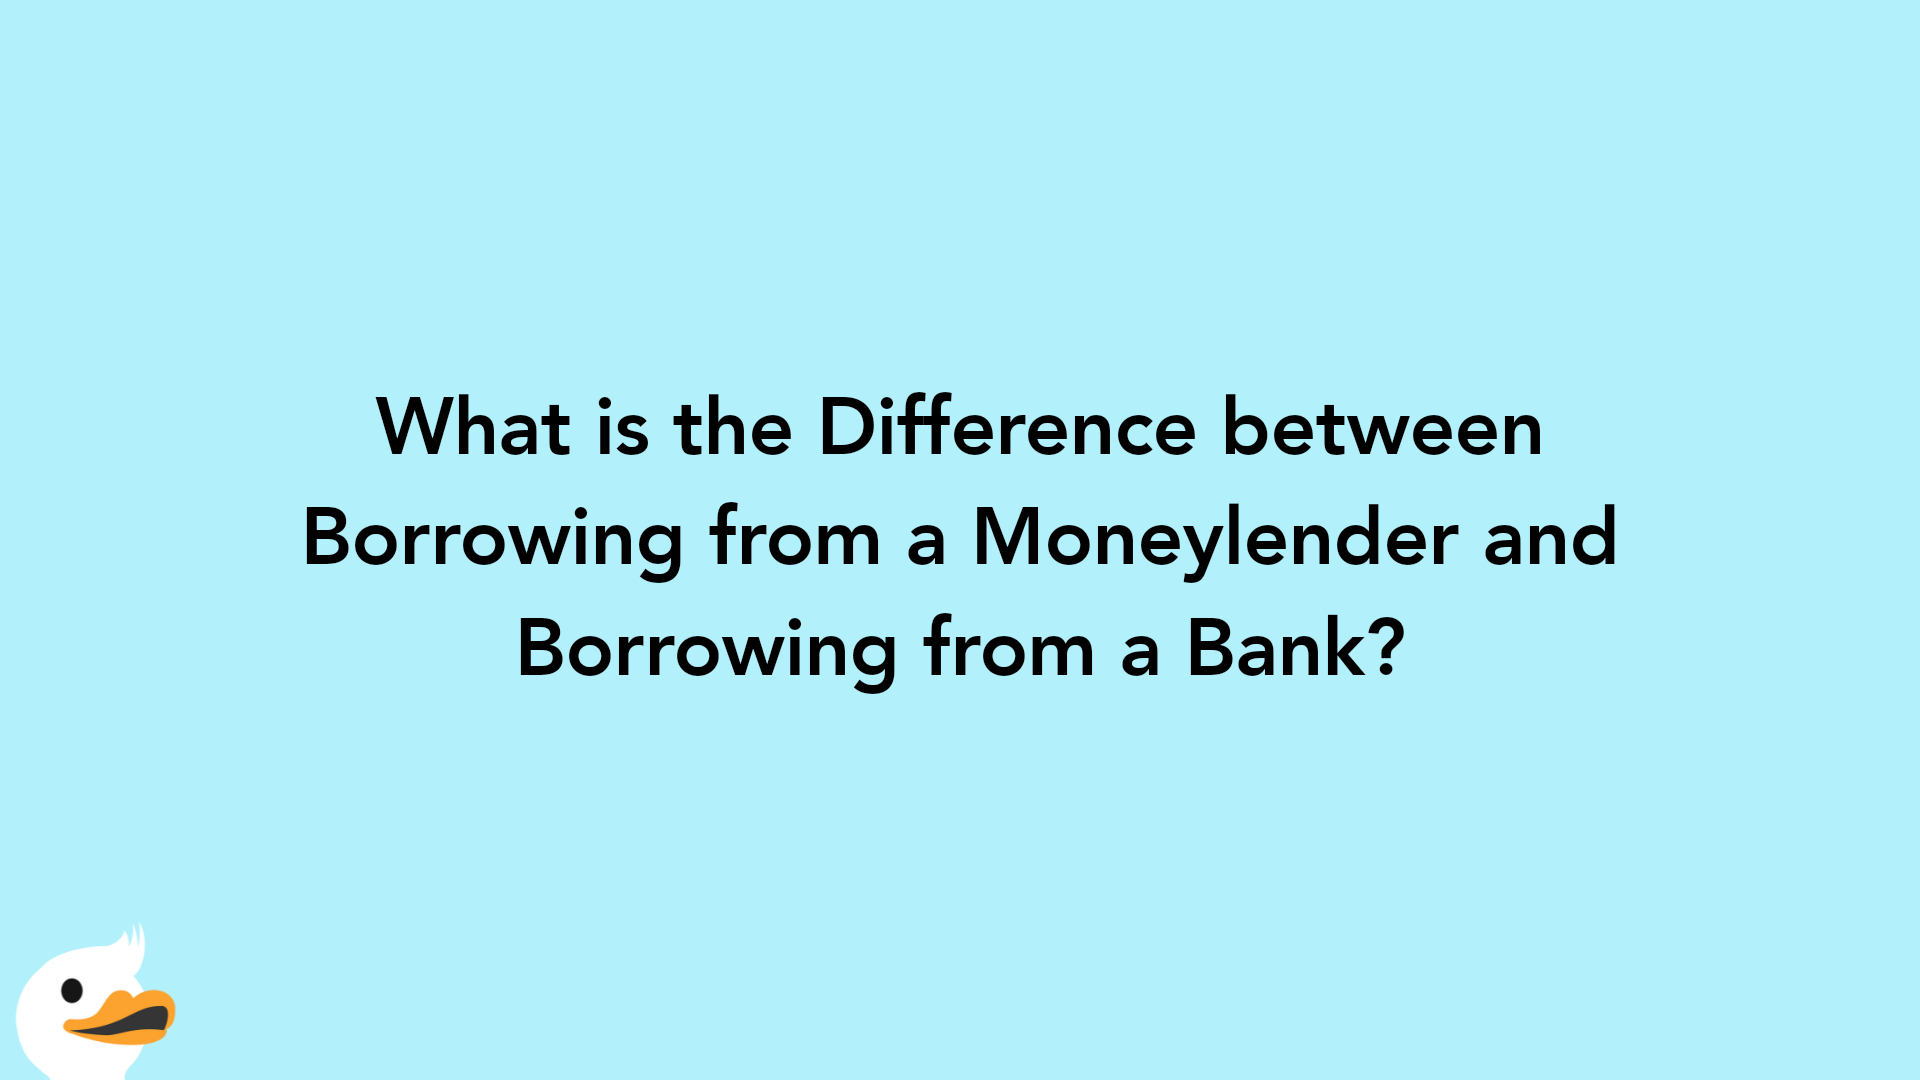 What is the Difference between Borrowing from a Moneylender and Borrowing from a Bank?